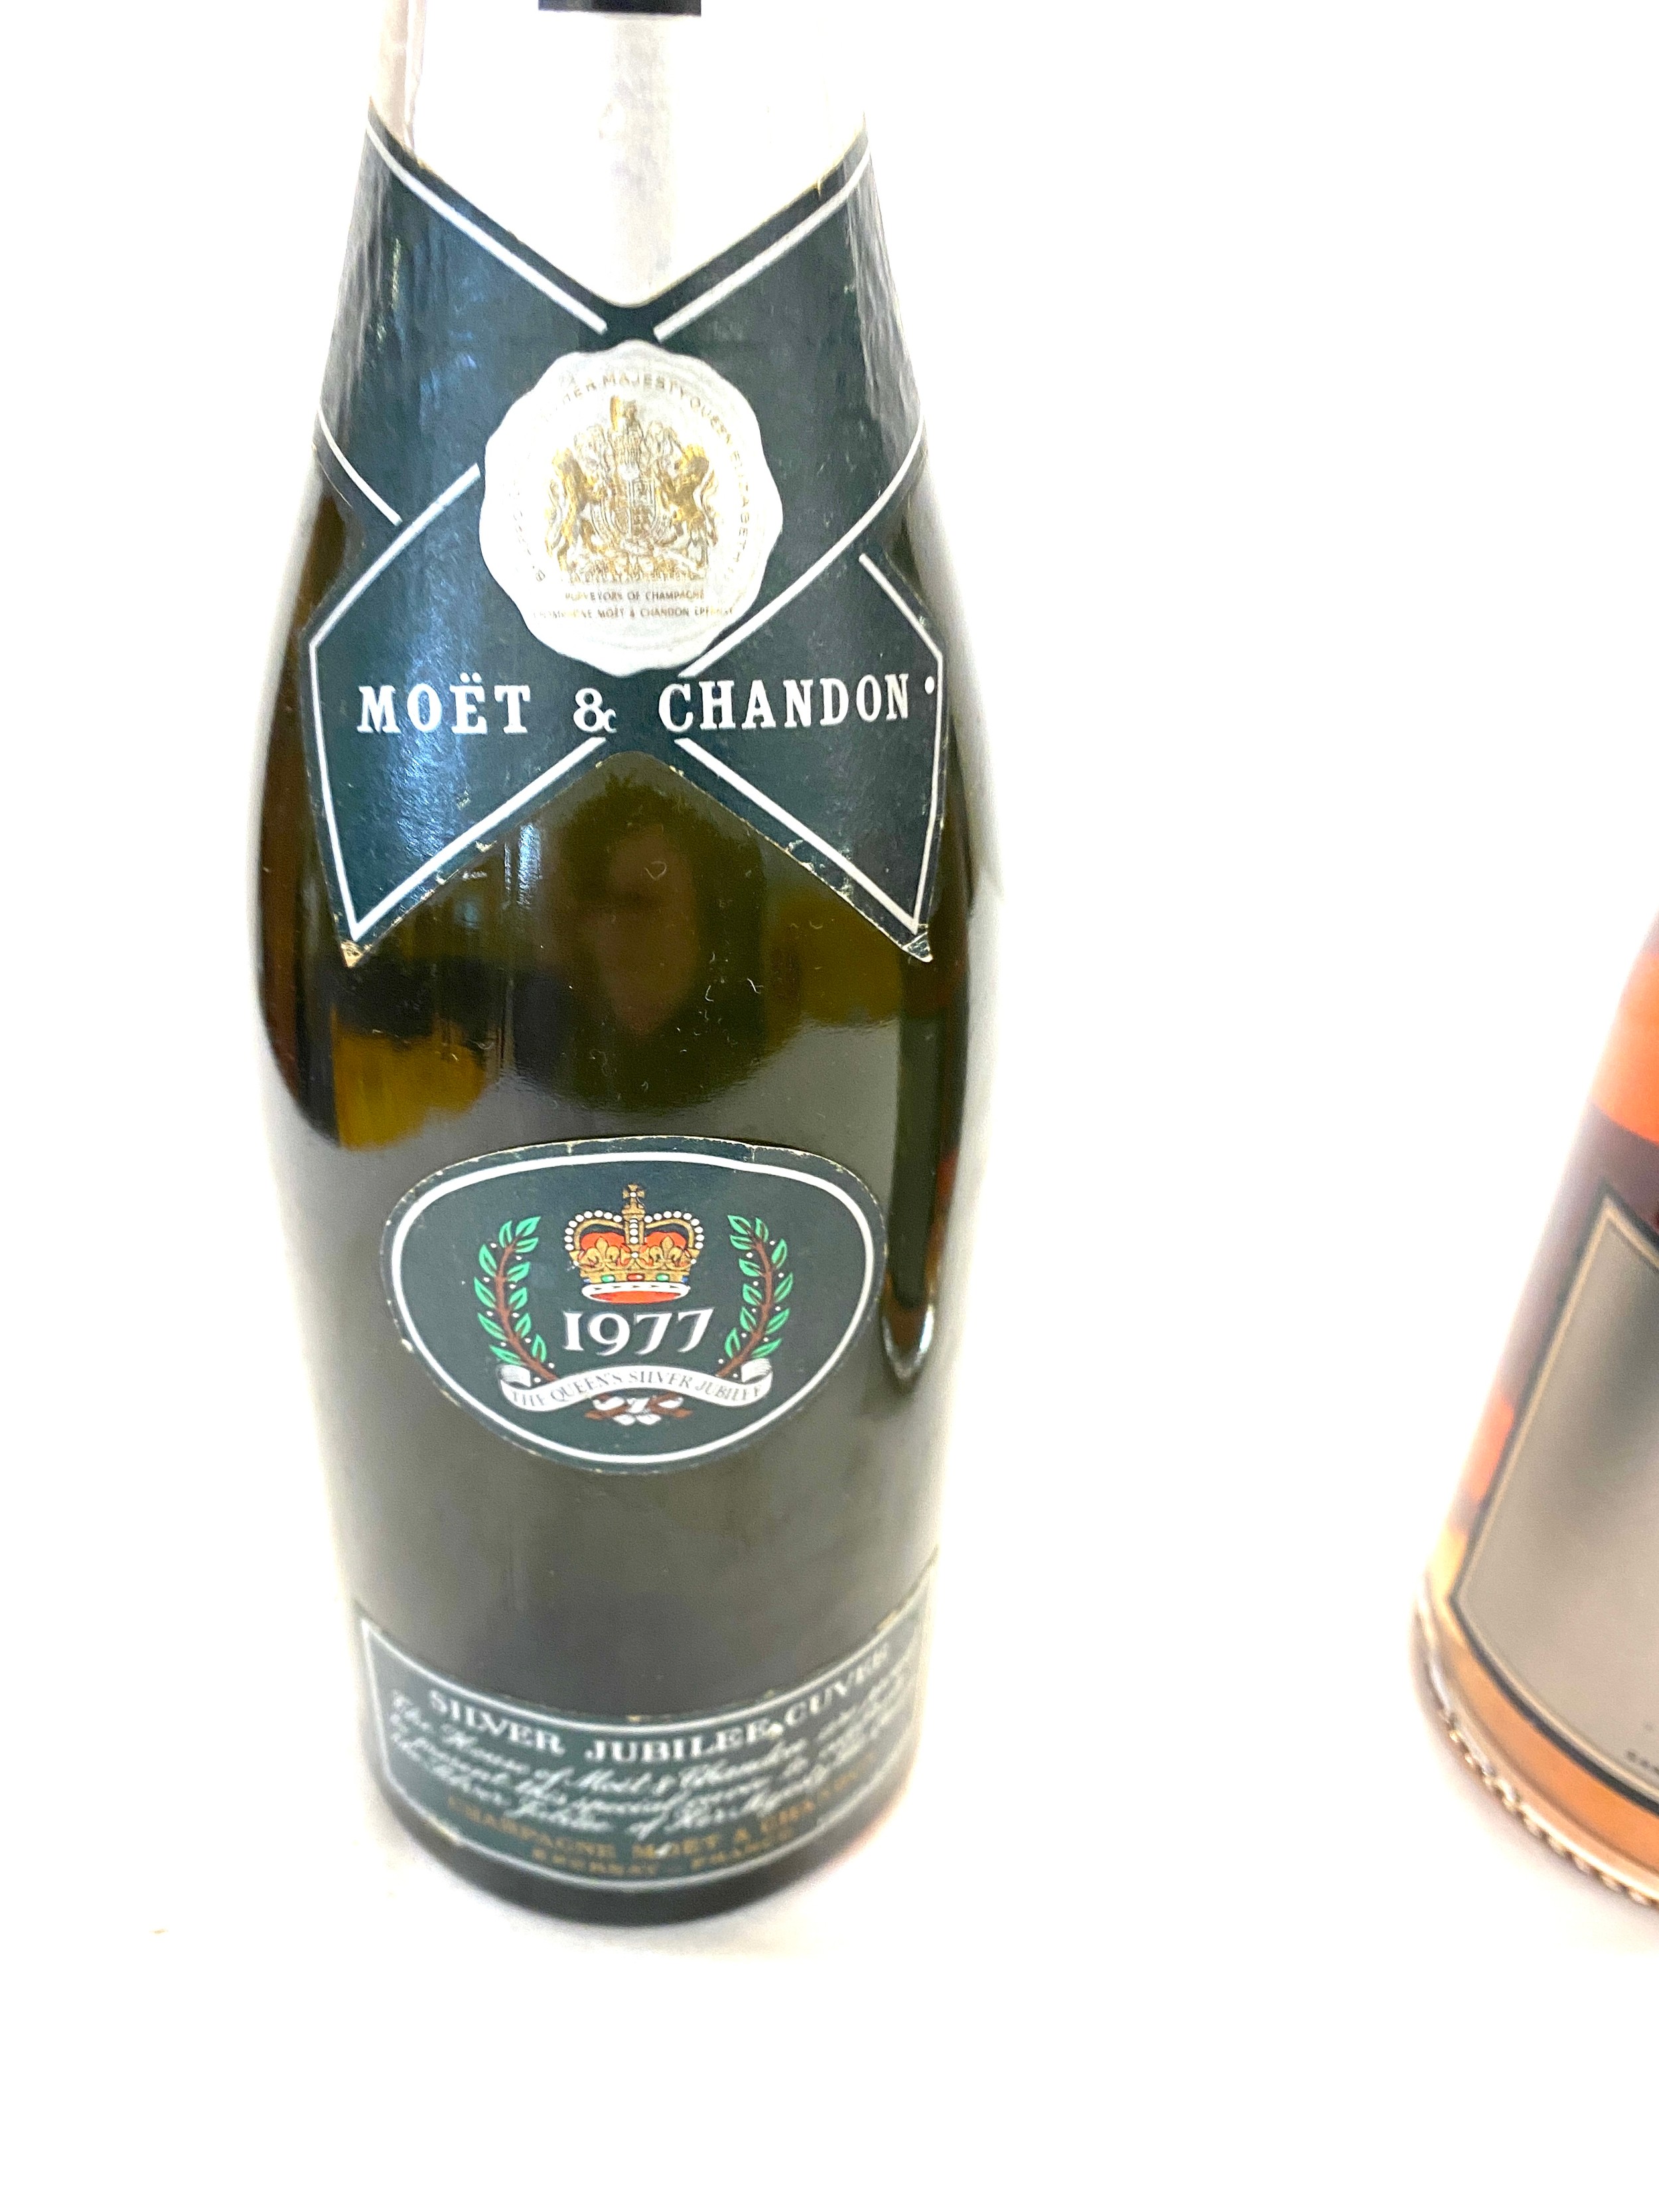 Bottle of sealed Moet and Chandon 1977, The queens silver jubille, Freixenet sealed bottle - Image 4 of 5